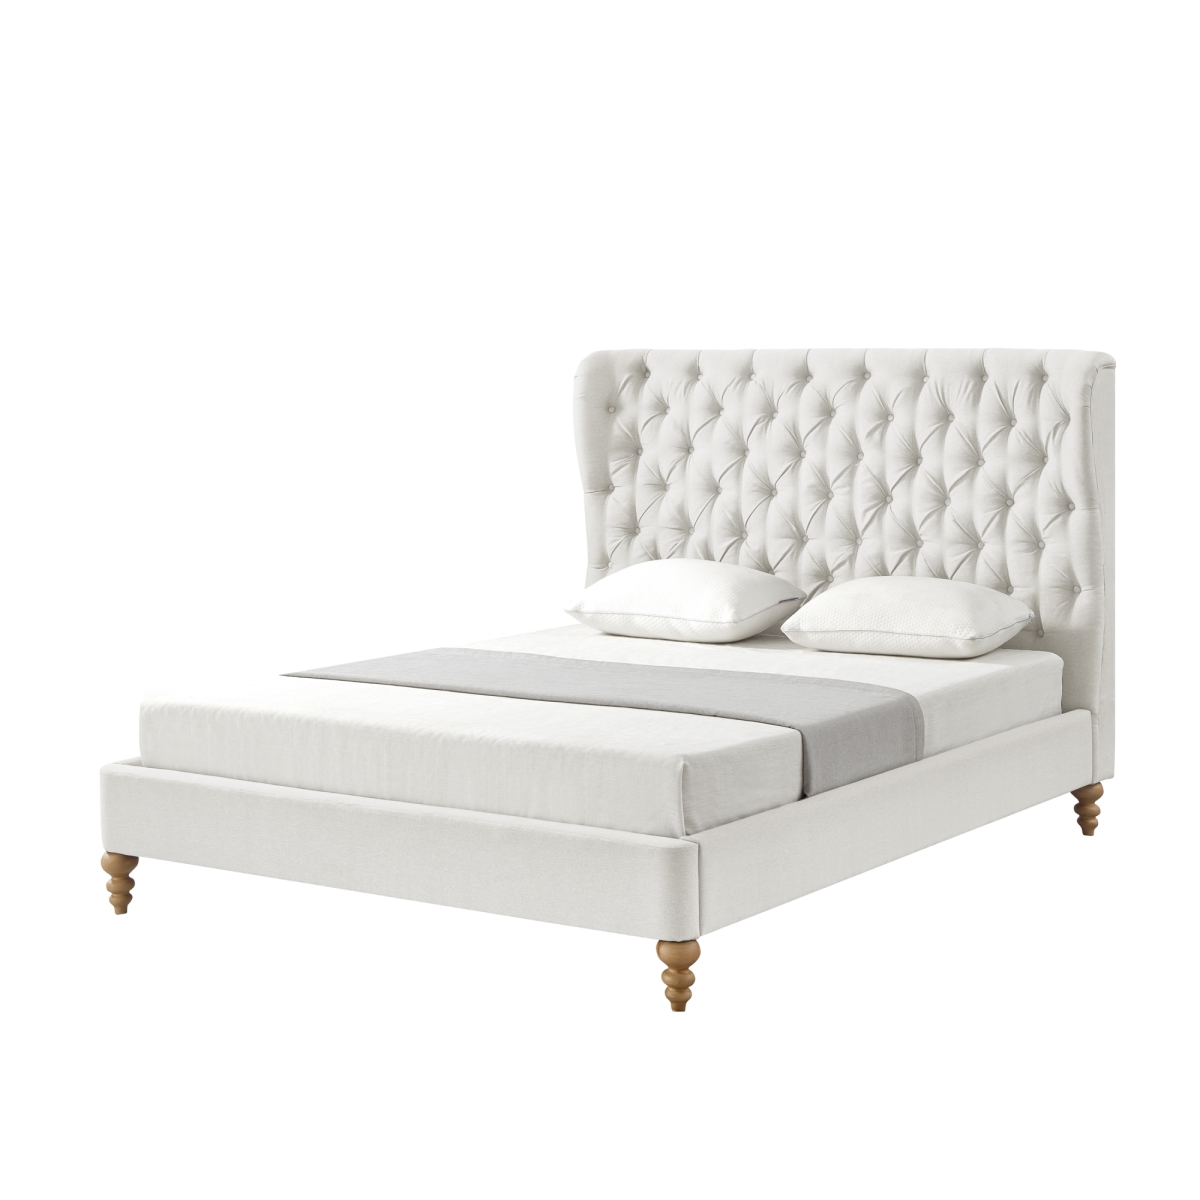 Picture of Rustic Manor SBD253-03CWT-UE Belrose Linen Twin  Bedframe with Tufted Headboard - Cream White